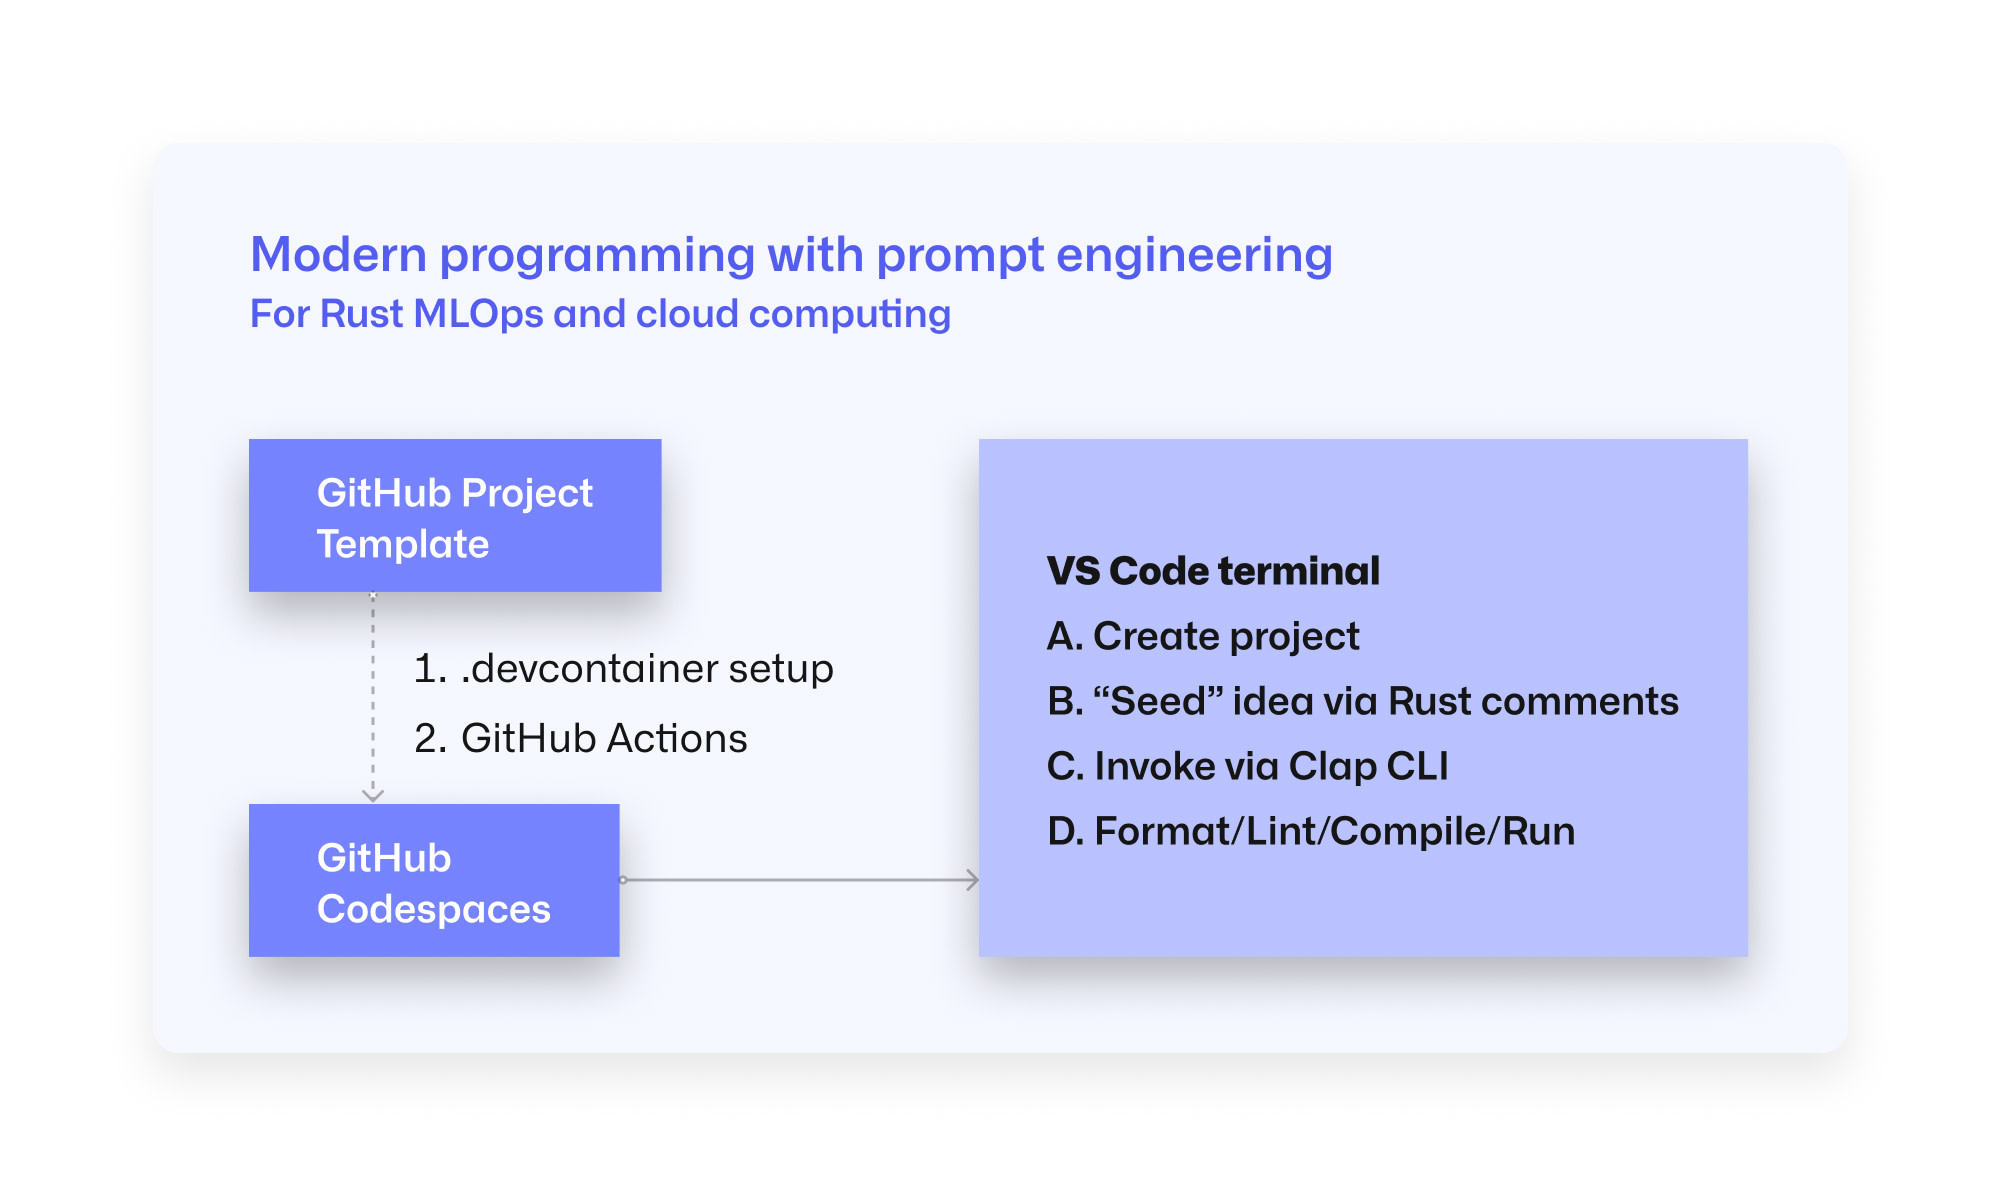 Flow chart depicting modern programming with prompt engineering for Rust MLOps and cloud computing